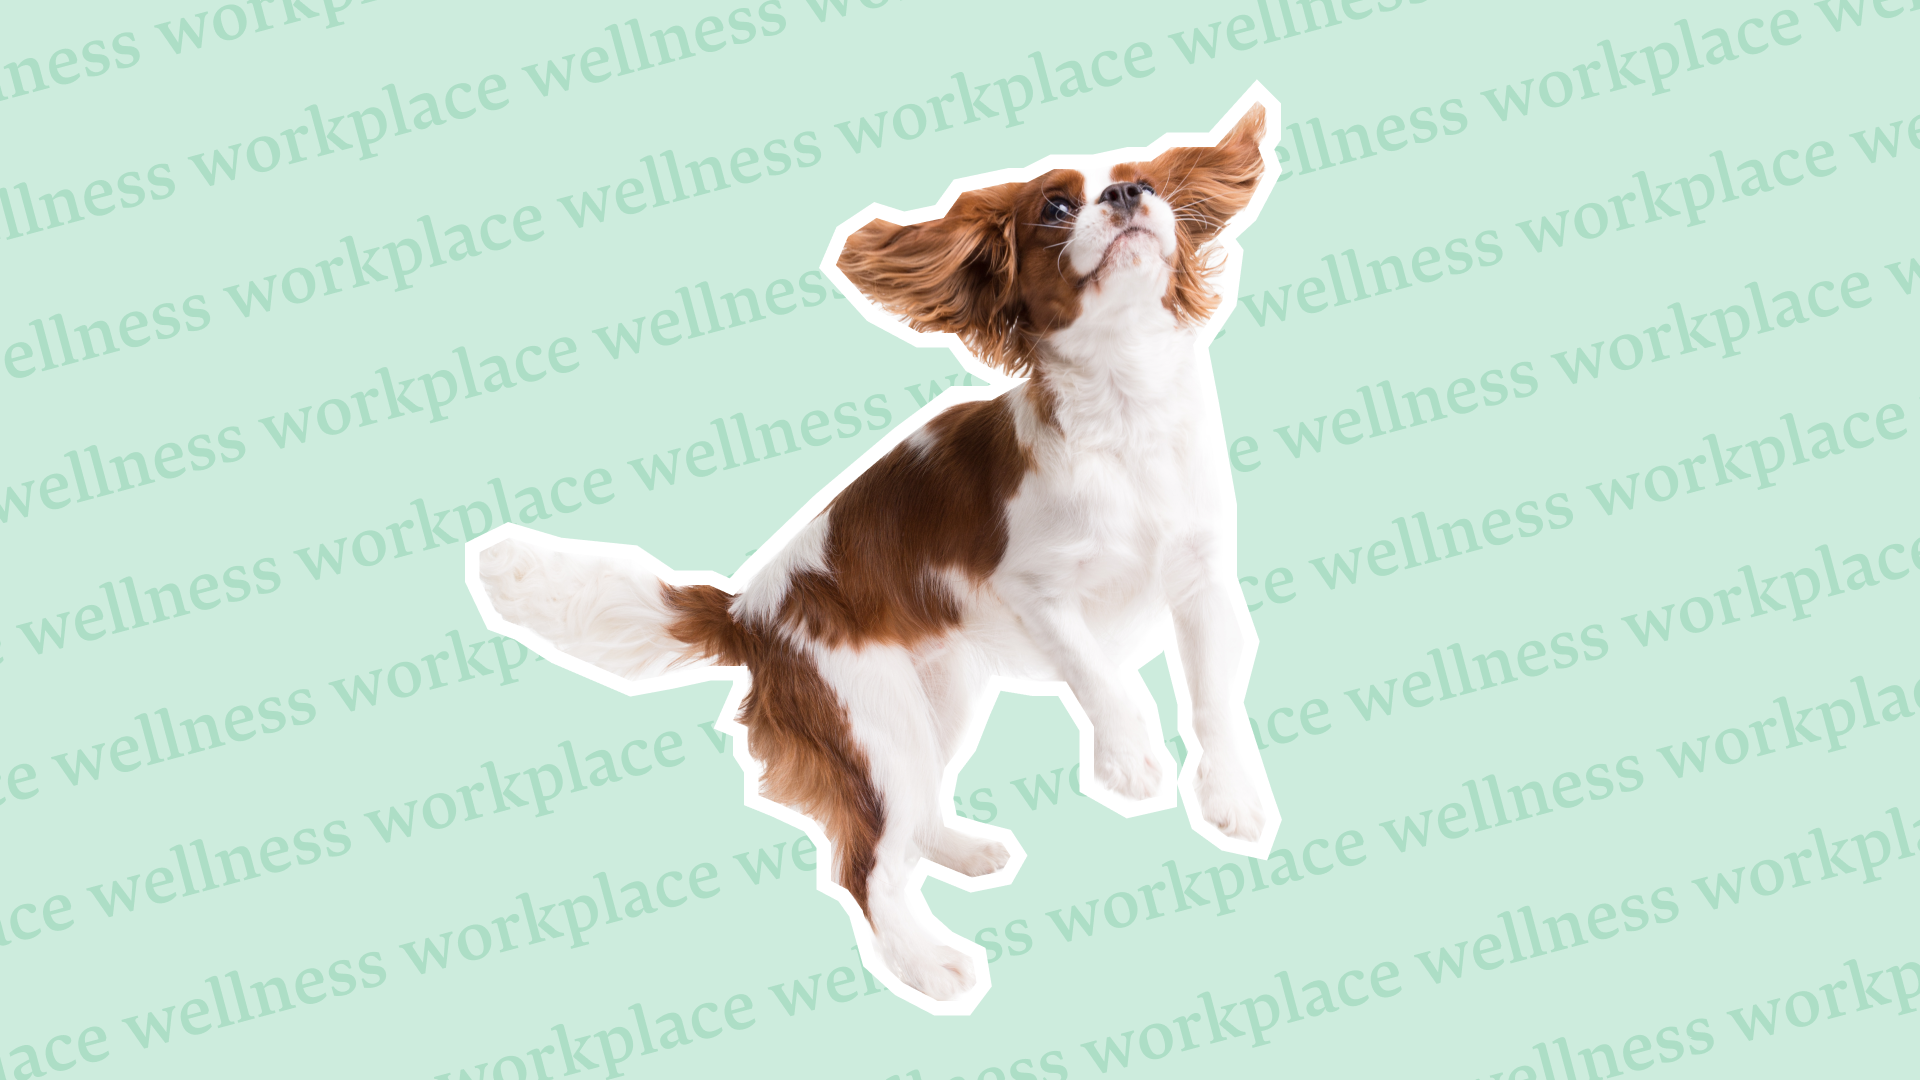 Blog - Hero - 17 Excellent Workplace Wellness Ideas That Don't Break the Bank